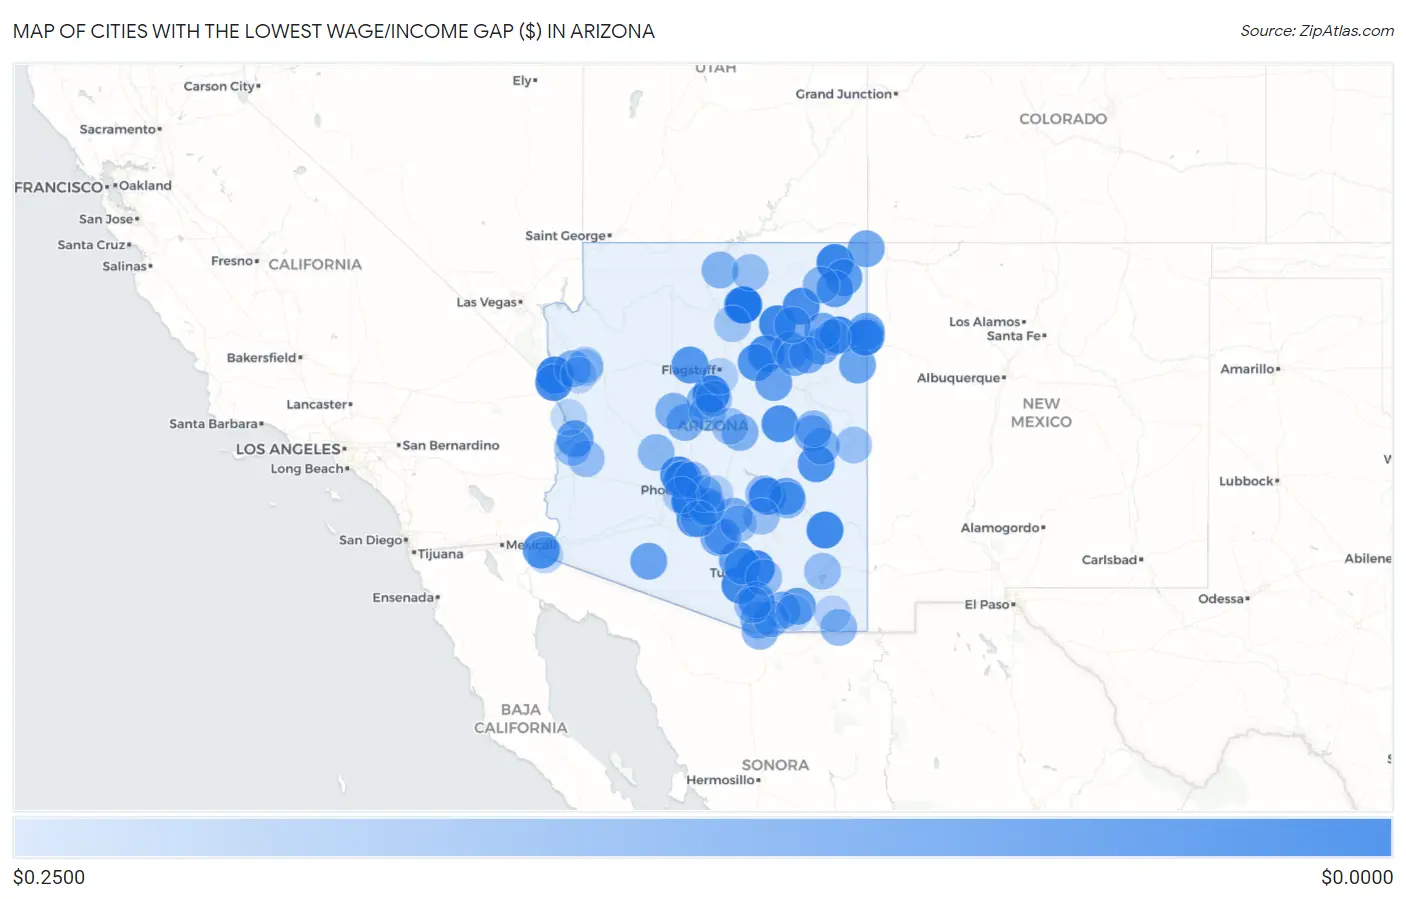 Cities with the Lowest Wage/Income Gap ($) in Arizona Map